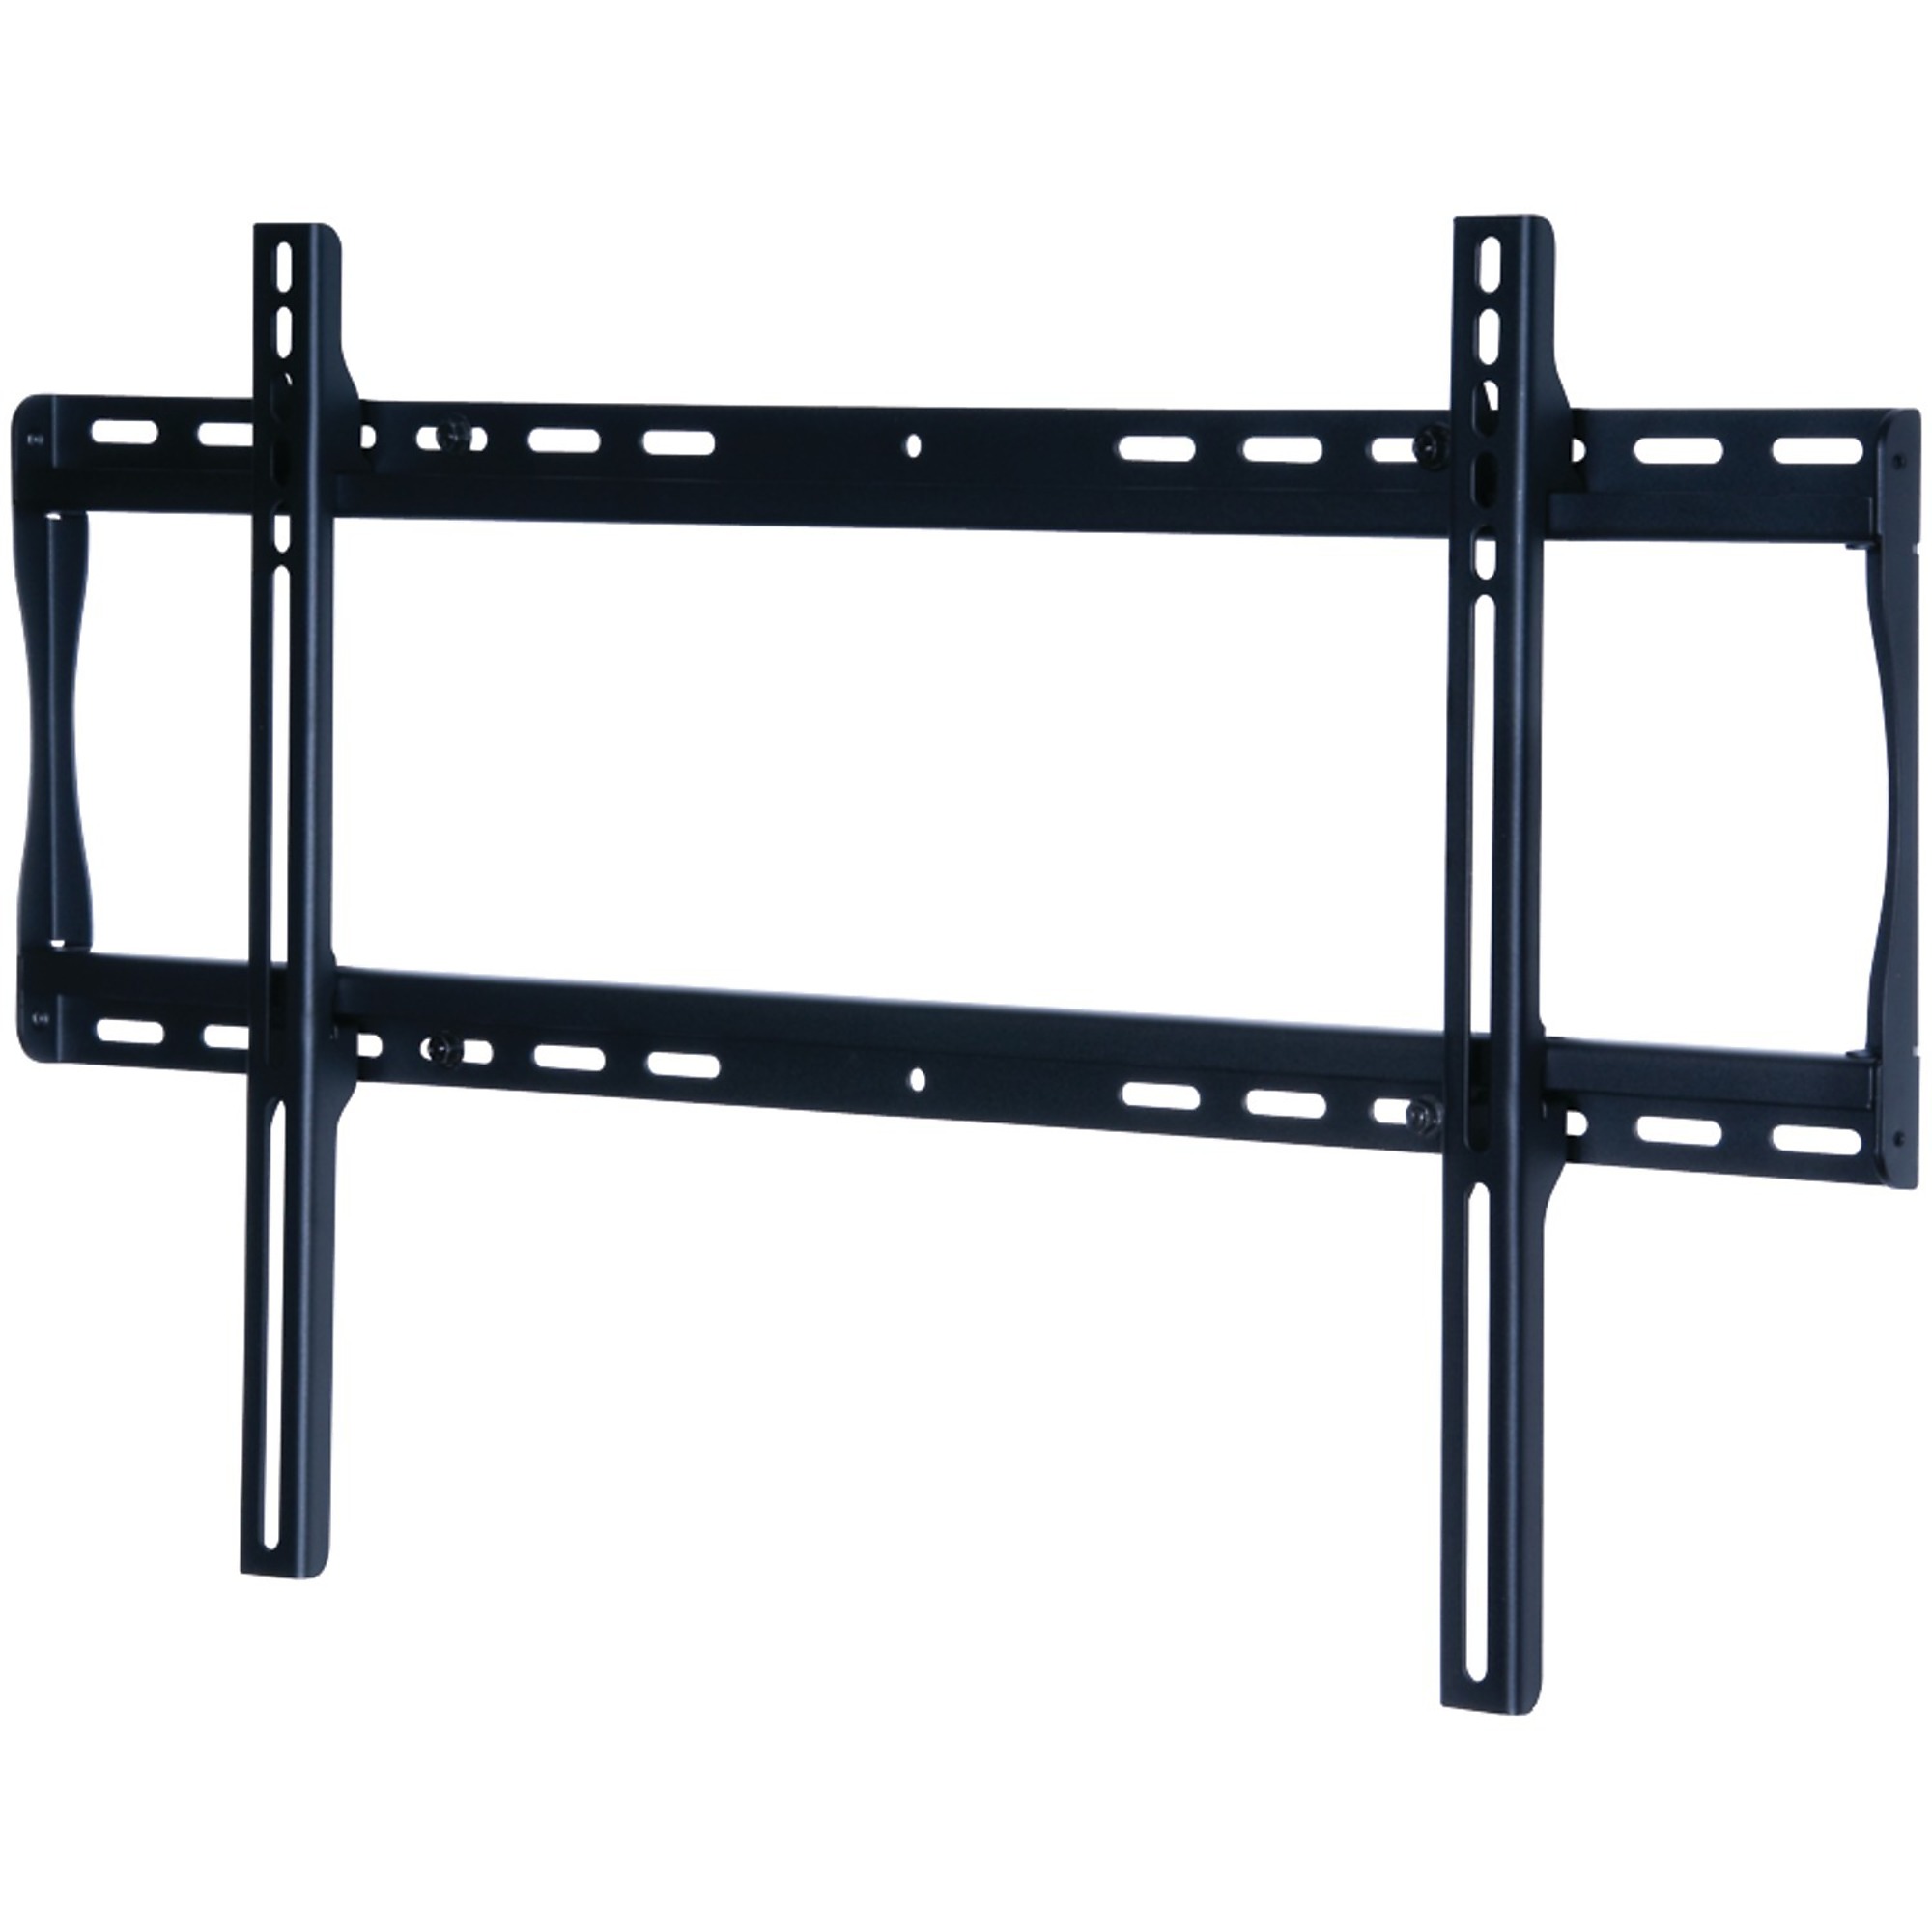 Peerless SmartMount , Universal 39Inch to 75Inch Flat Panel Wall Mount, Capacity 175 lb, Material Steel, Color Finish Black, Model SF650P